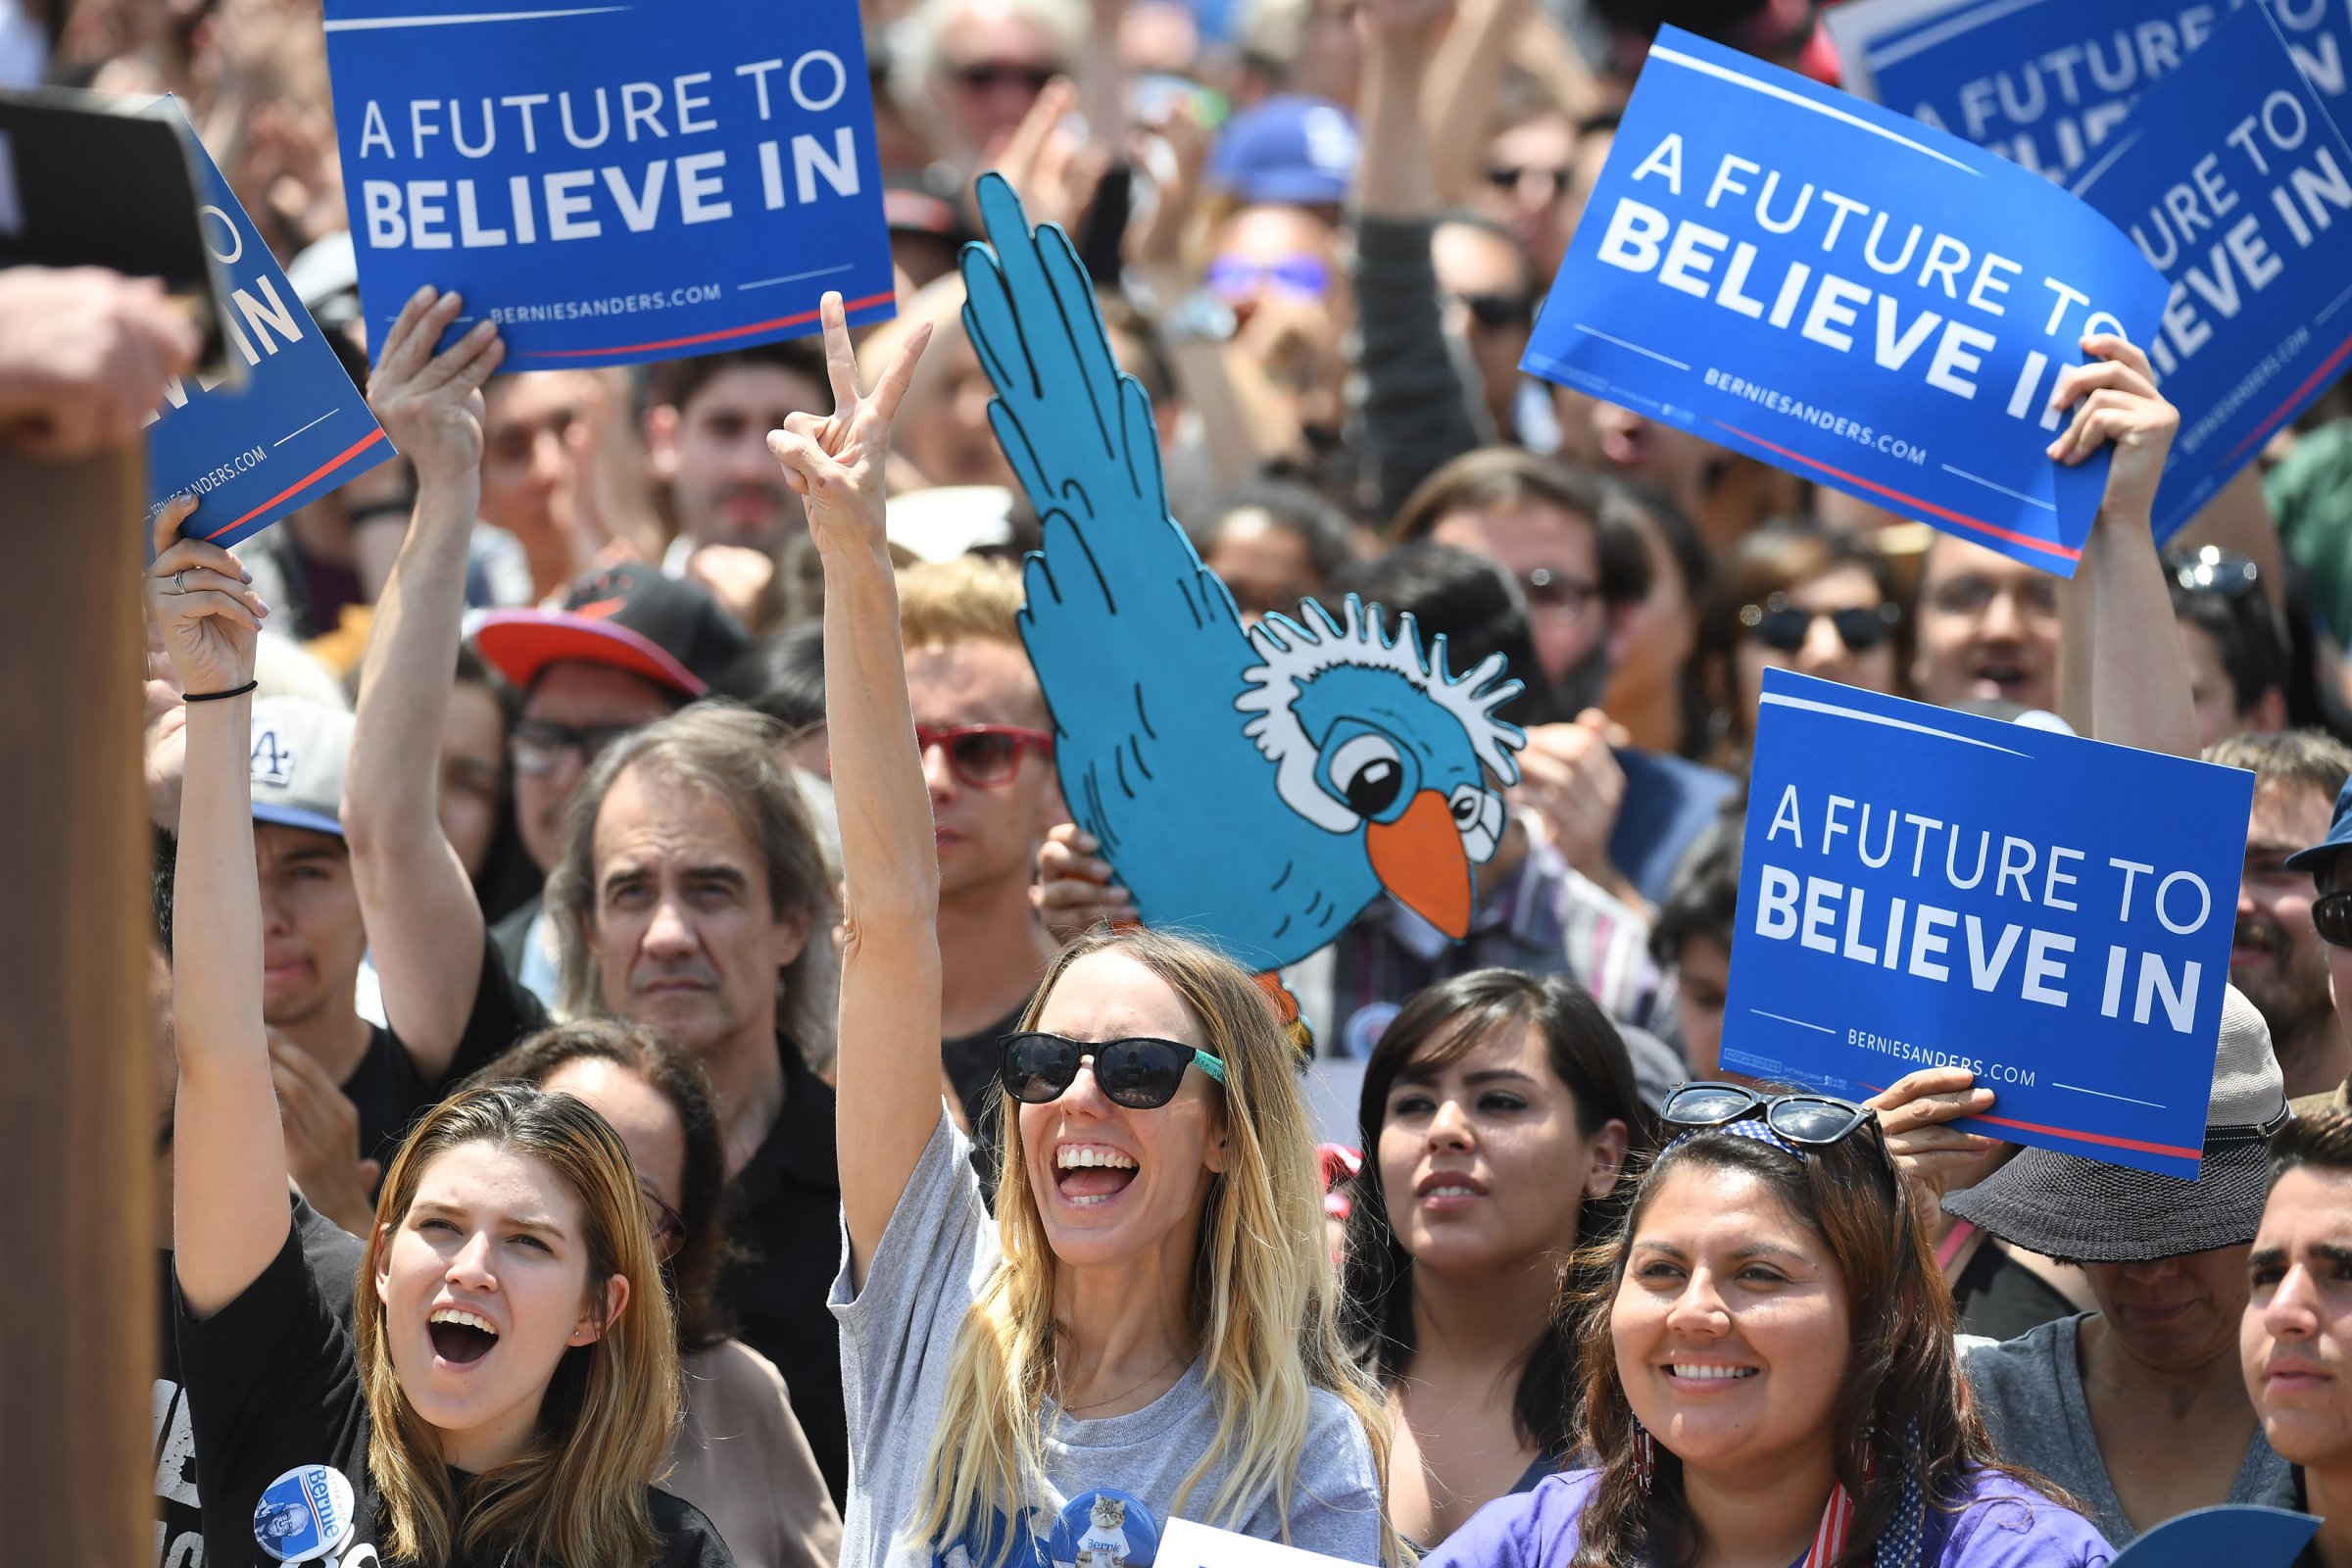 People listen as Bernie Sanders speaks during a rally at Lincoln Park on May 23, 2016 in Los Angeles.